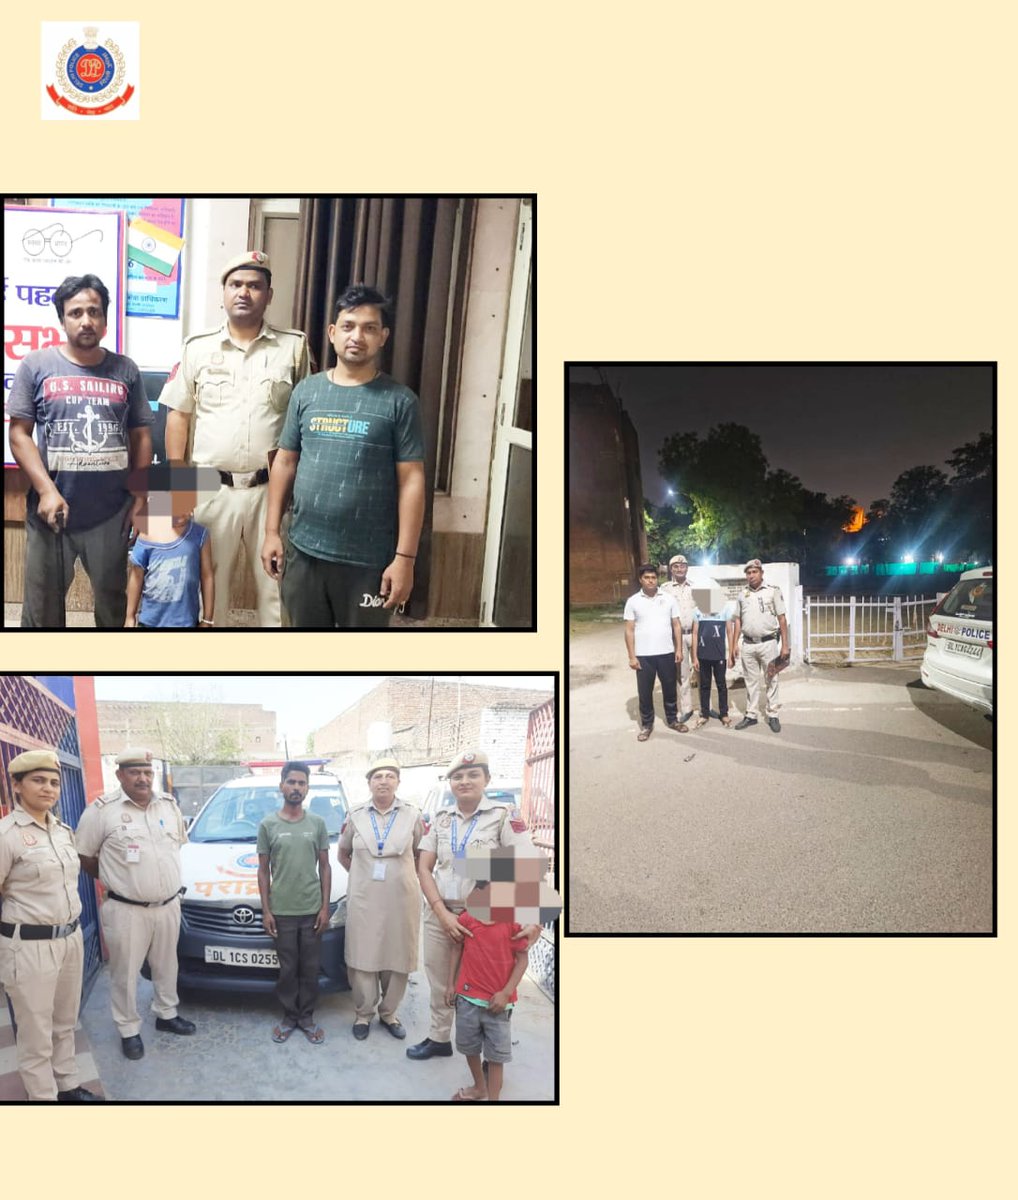 #Delhi #Police #PCR personnel reunited three #missing #children with their families. Not only brought smile to the families back but averted probable mishaps also. #OperationMilap #DelhiPoliceUpdates #PCRUpdates @DelhiPolice @CPDelhi